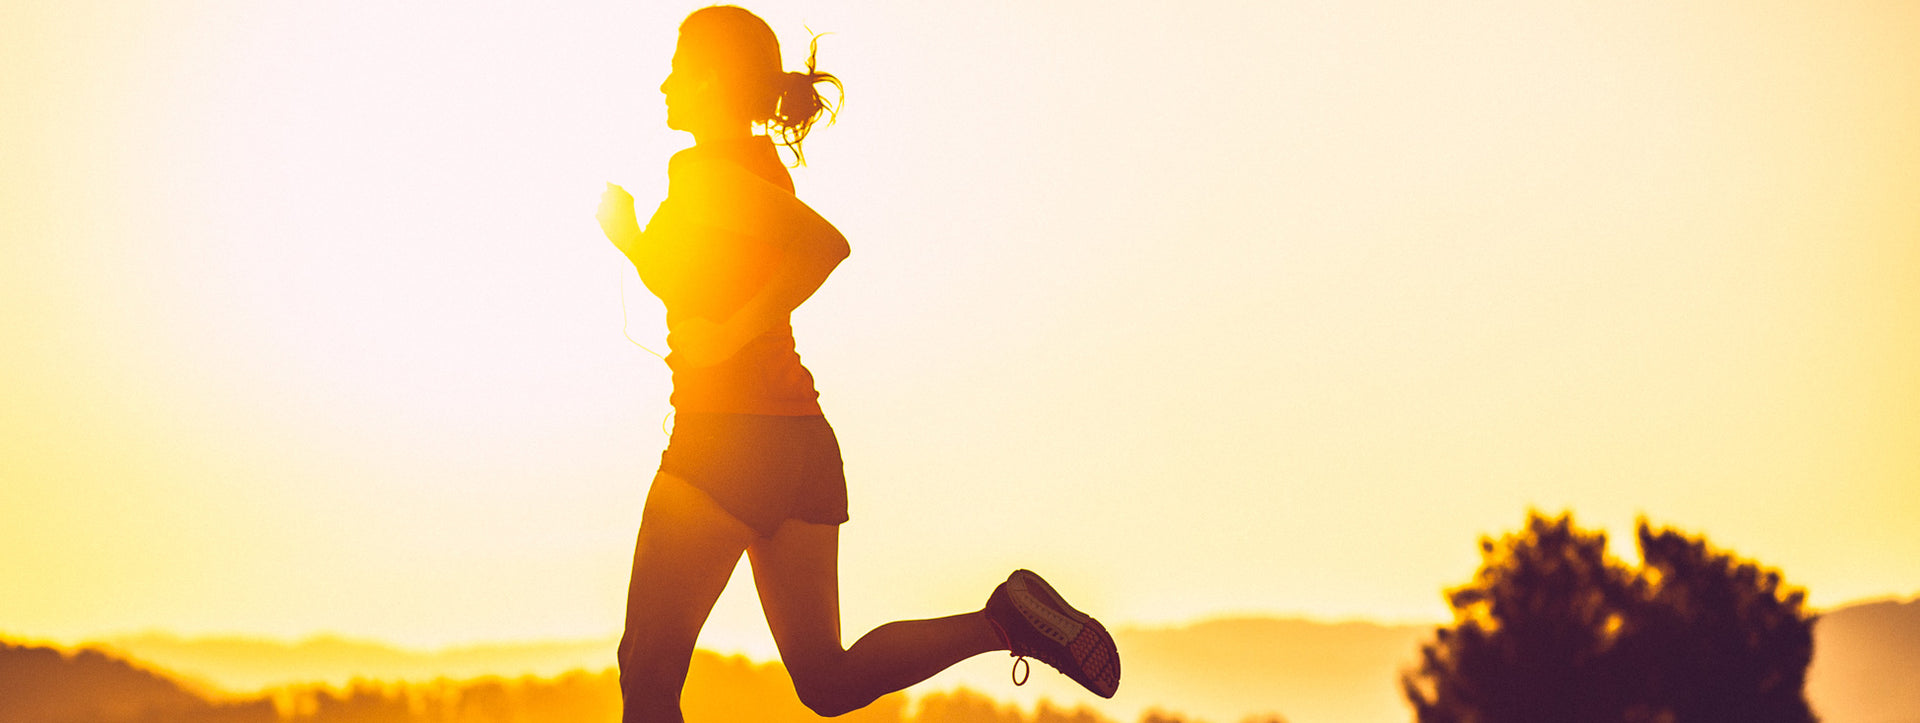 Get Moving! Scientifically proven ways to get motivated